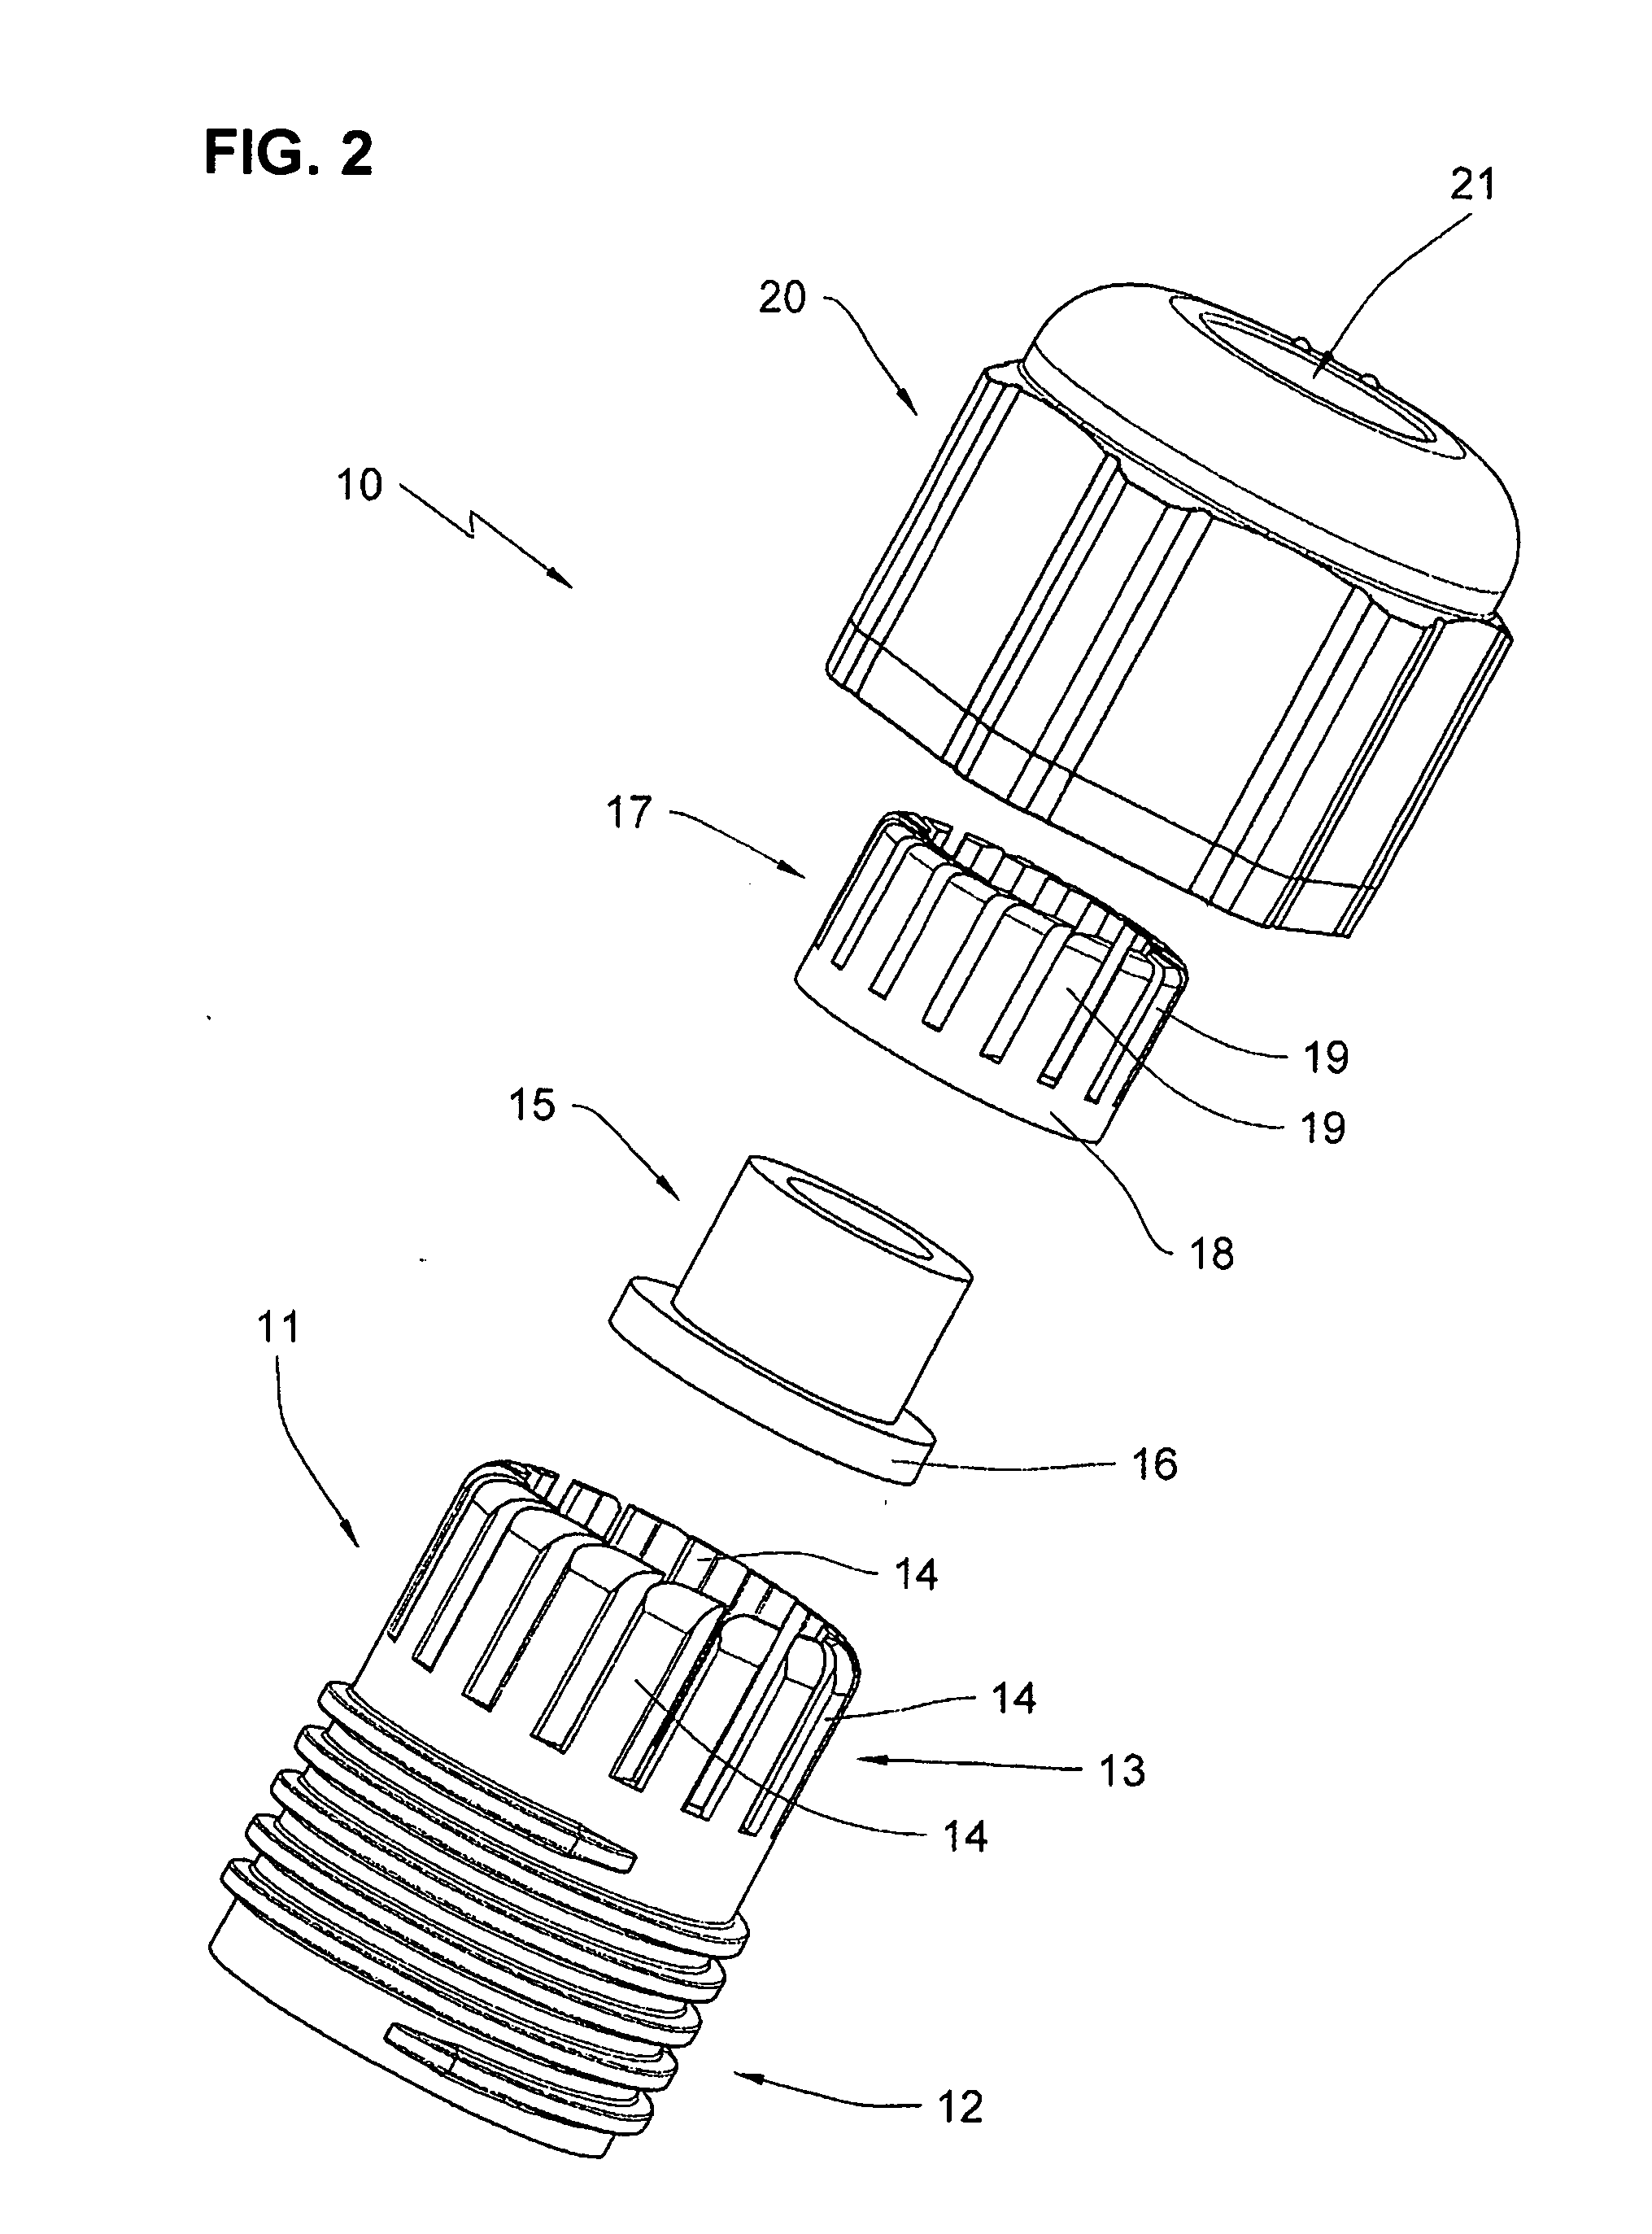 Device for fixating cables with pull relief